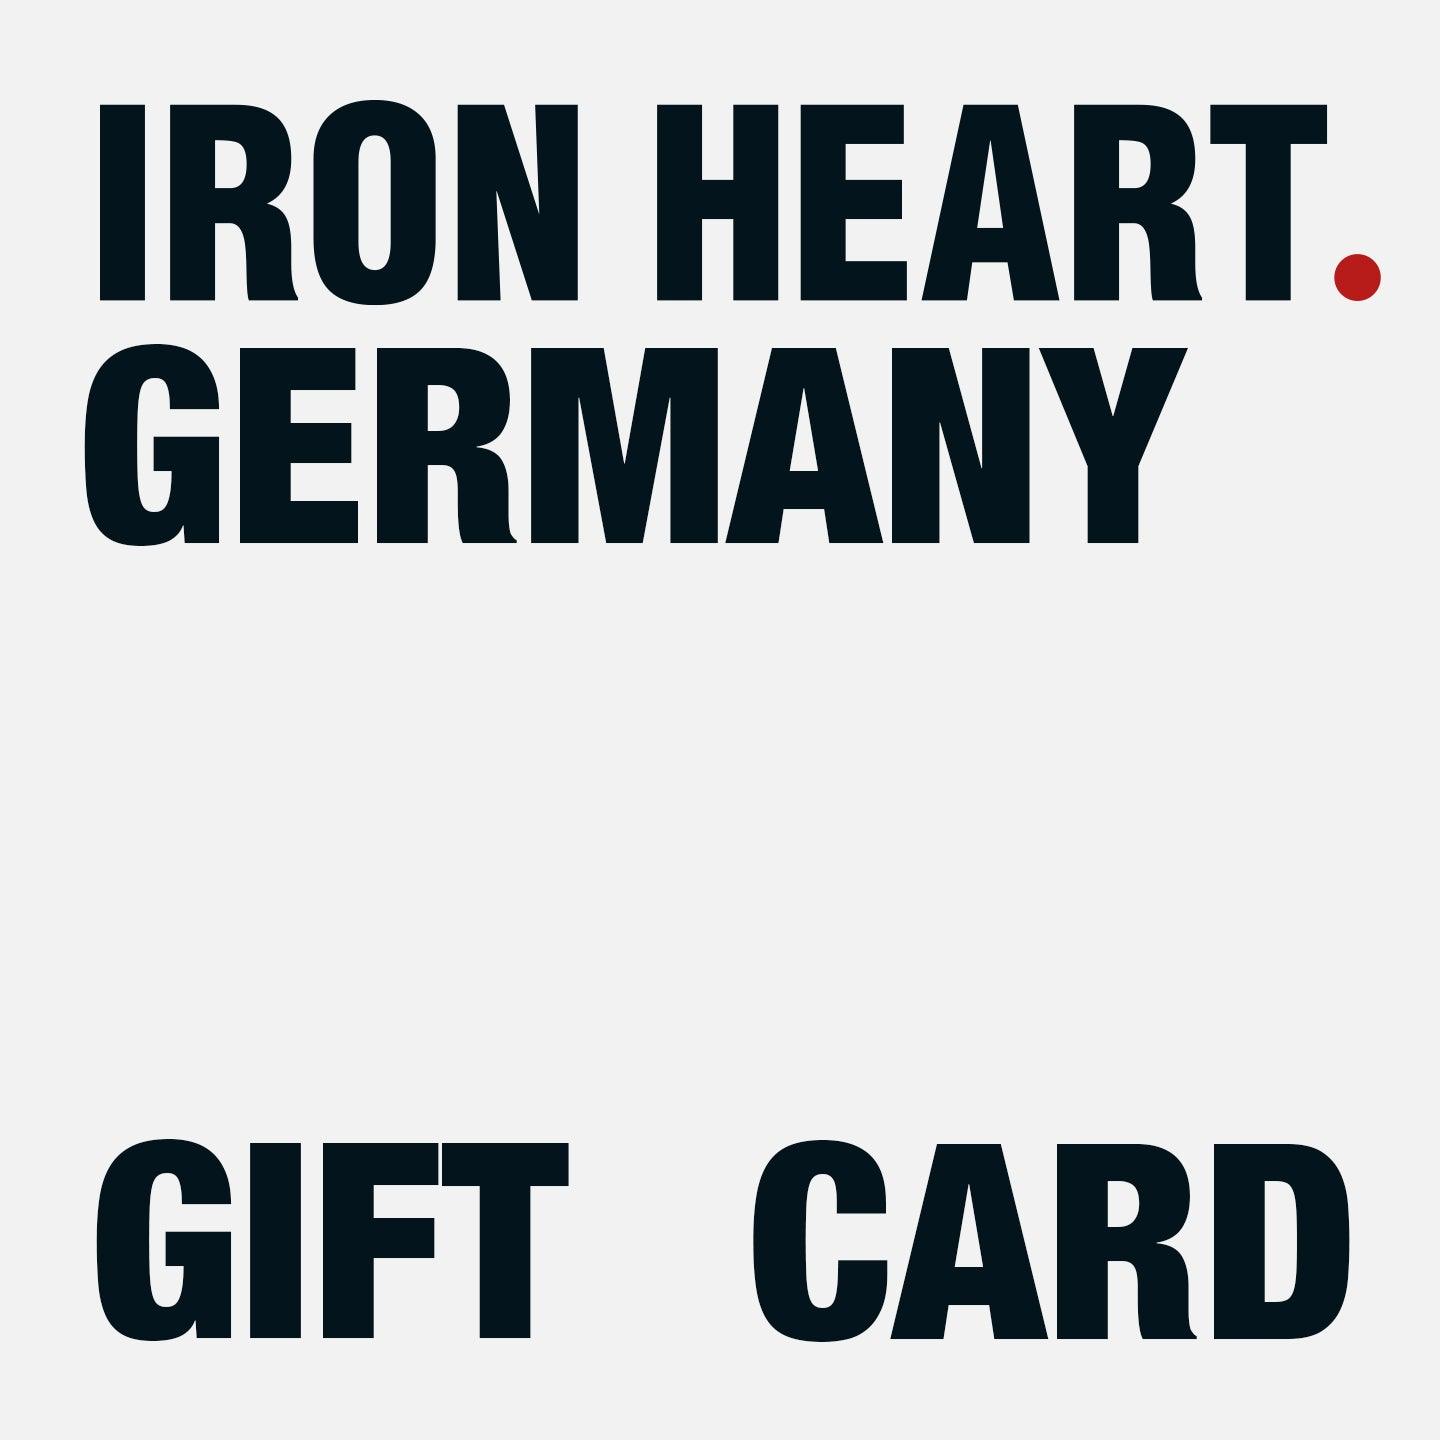 Image showing the IRON HEART GERMANY Gift Card which is a Gift-Card described by the following info Accessories, giftcard, Others, Released and sold on the IRON HEART GERMANY online store